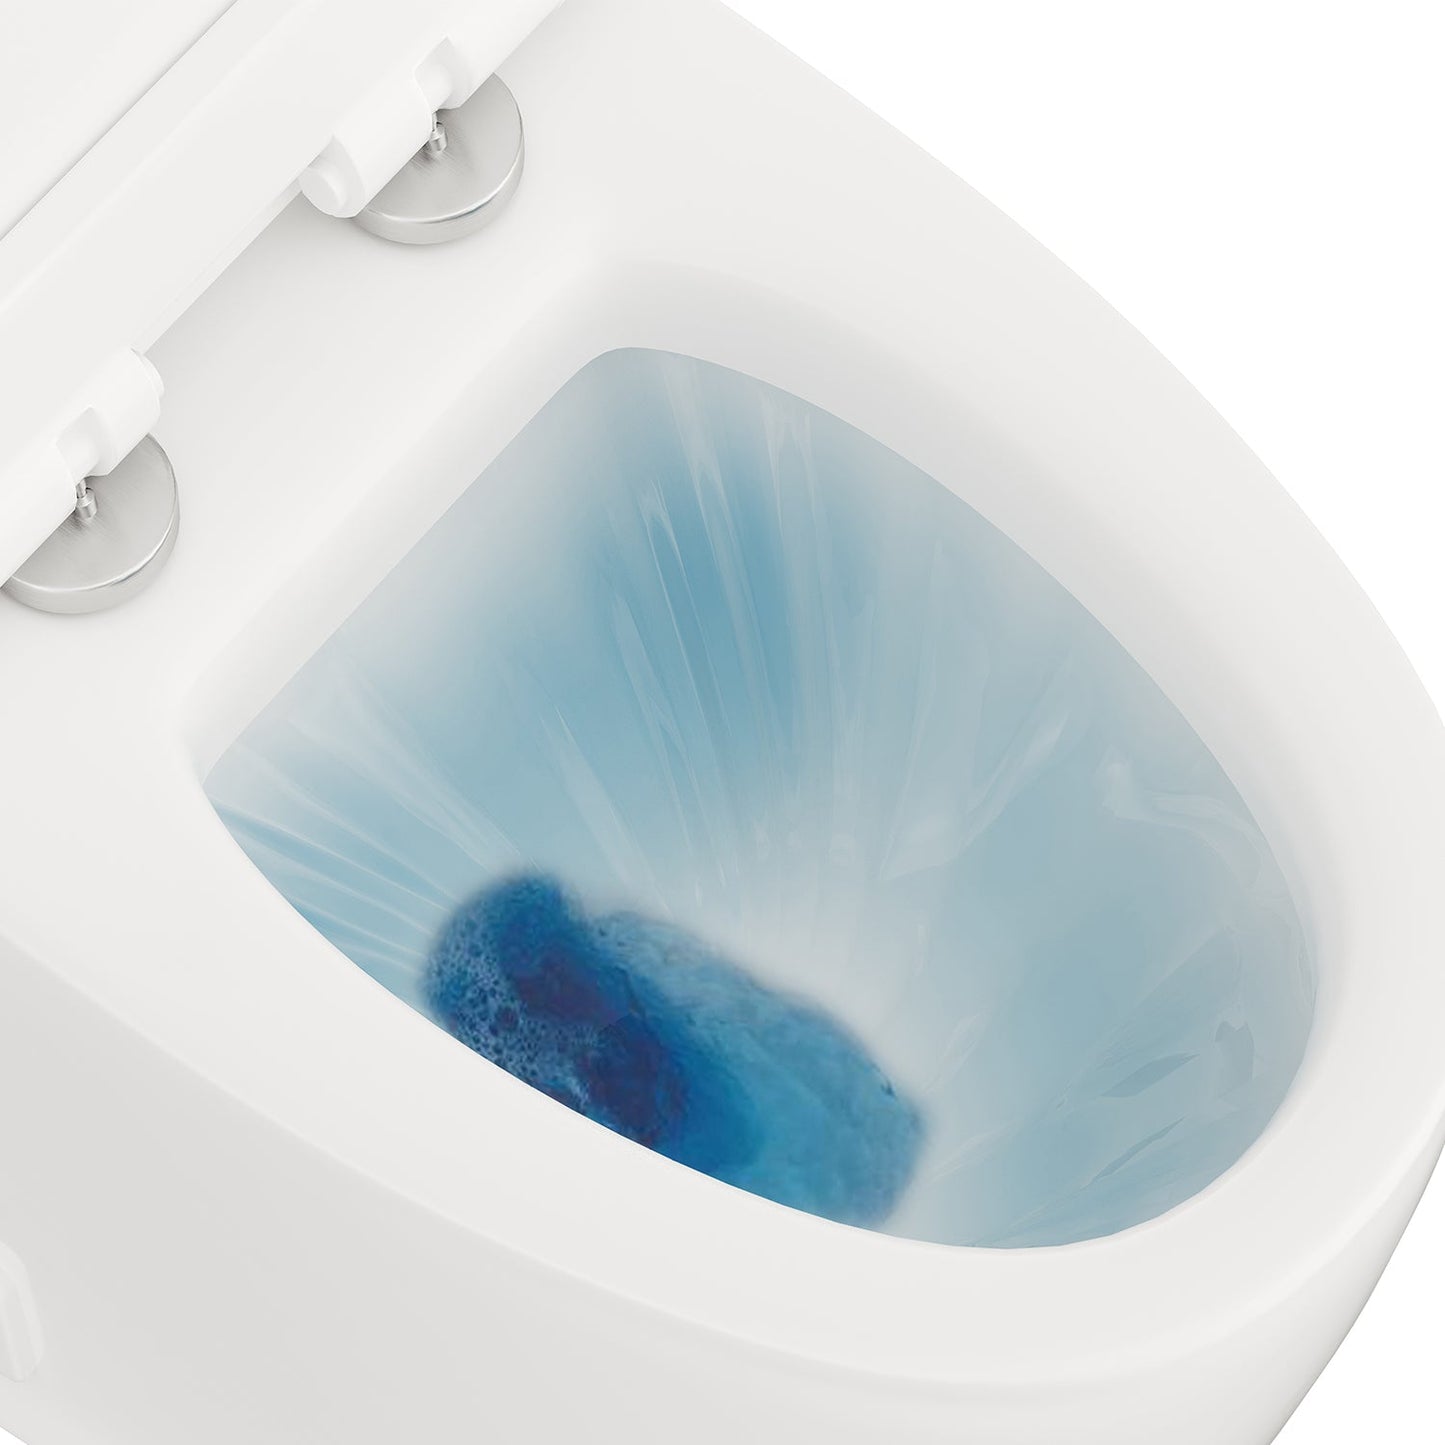 Eviva Zion One Piece Toilet in White